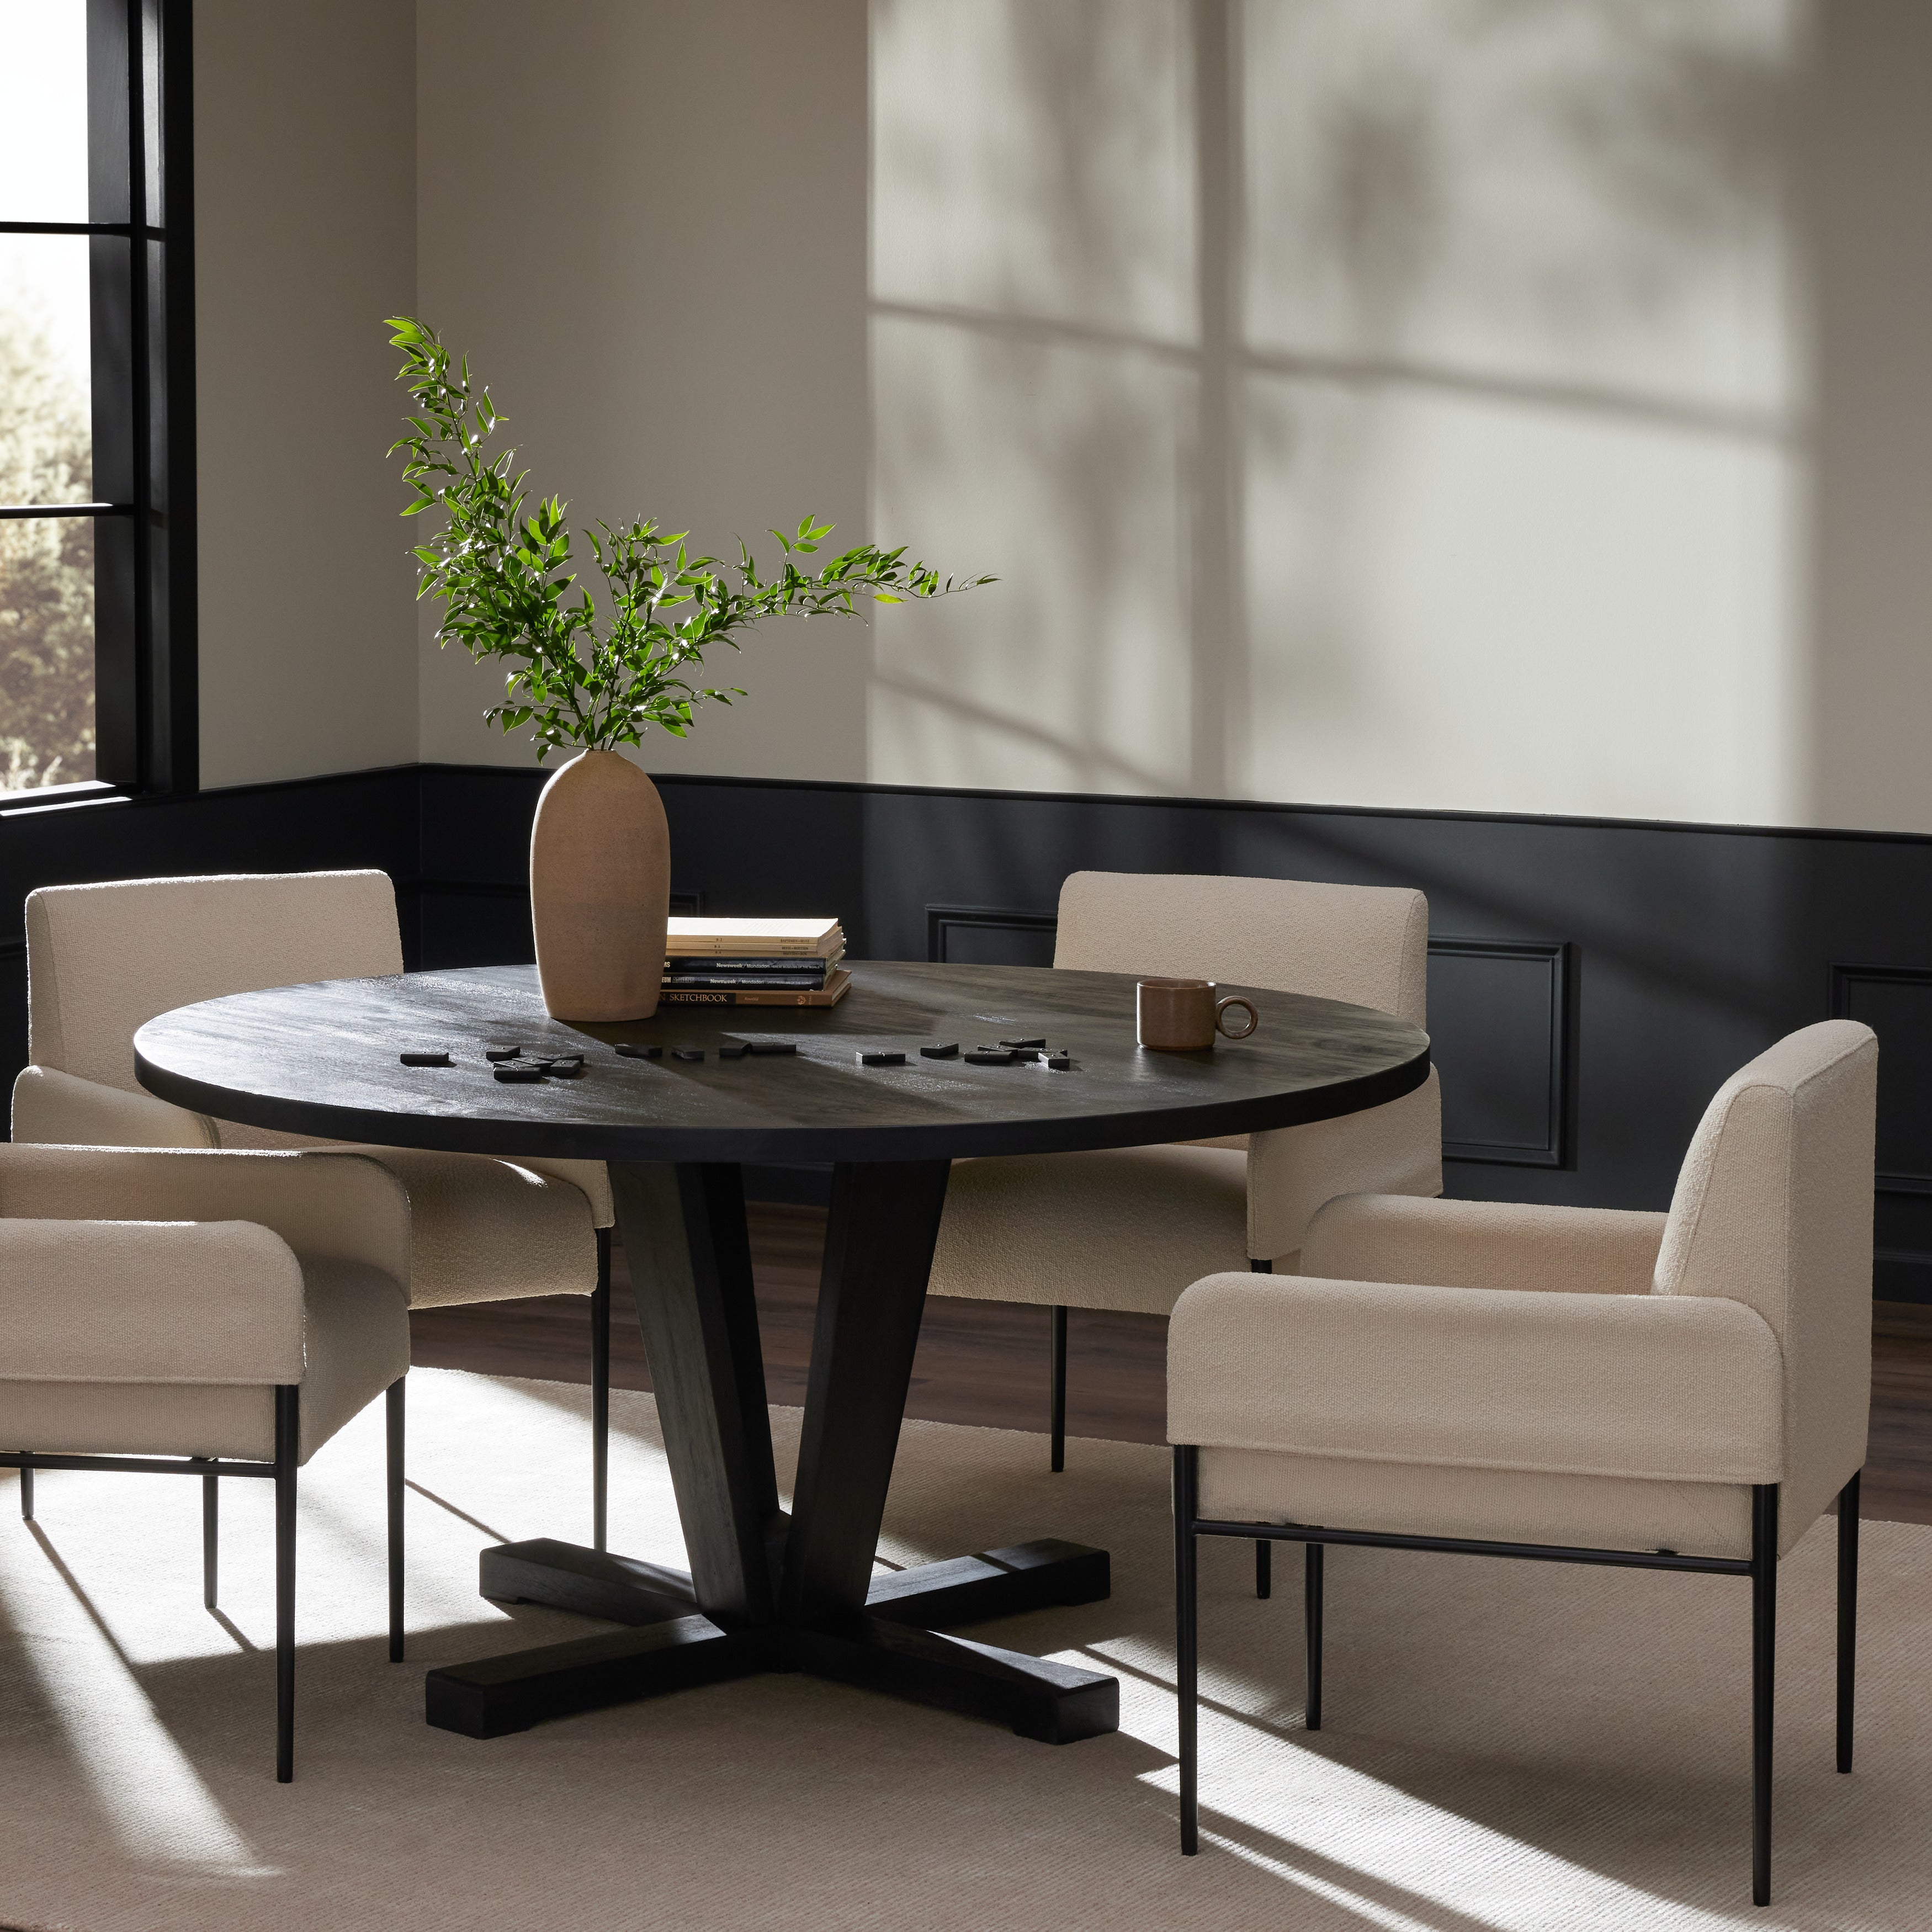 A rounded table of solid mango wood forms purposefully burnished edges, producing a warm black patina for the home dining table. Amethyst Home provides interior design, new construction, custom furniture, and area rugs in the Kansas City metro area.